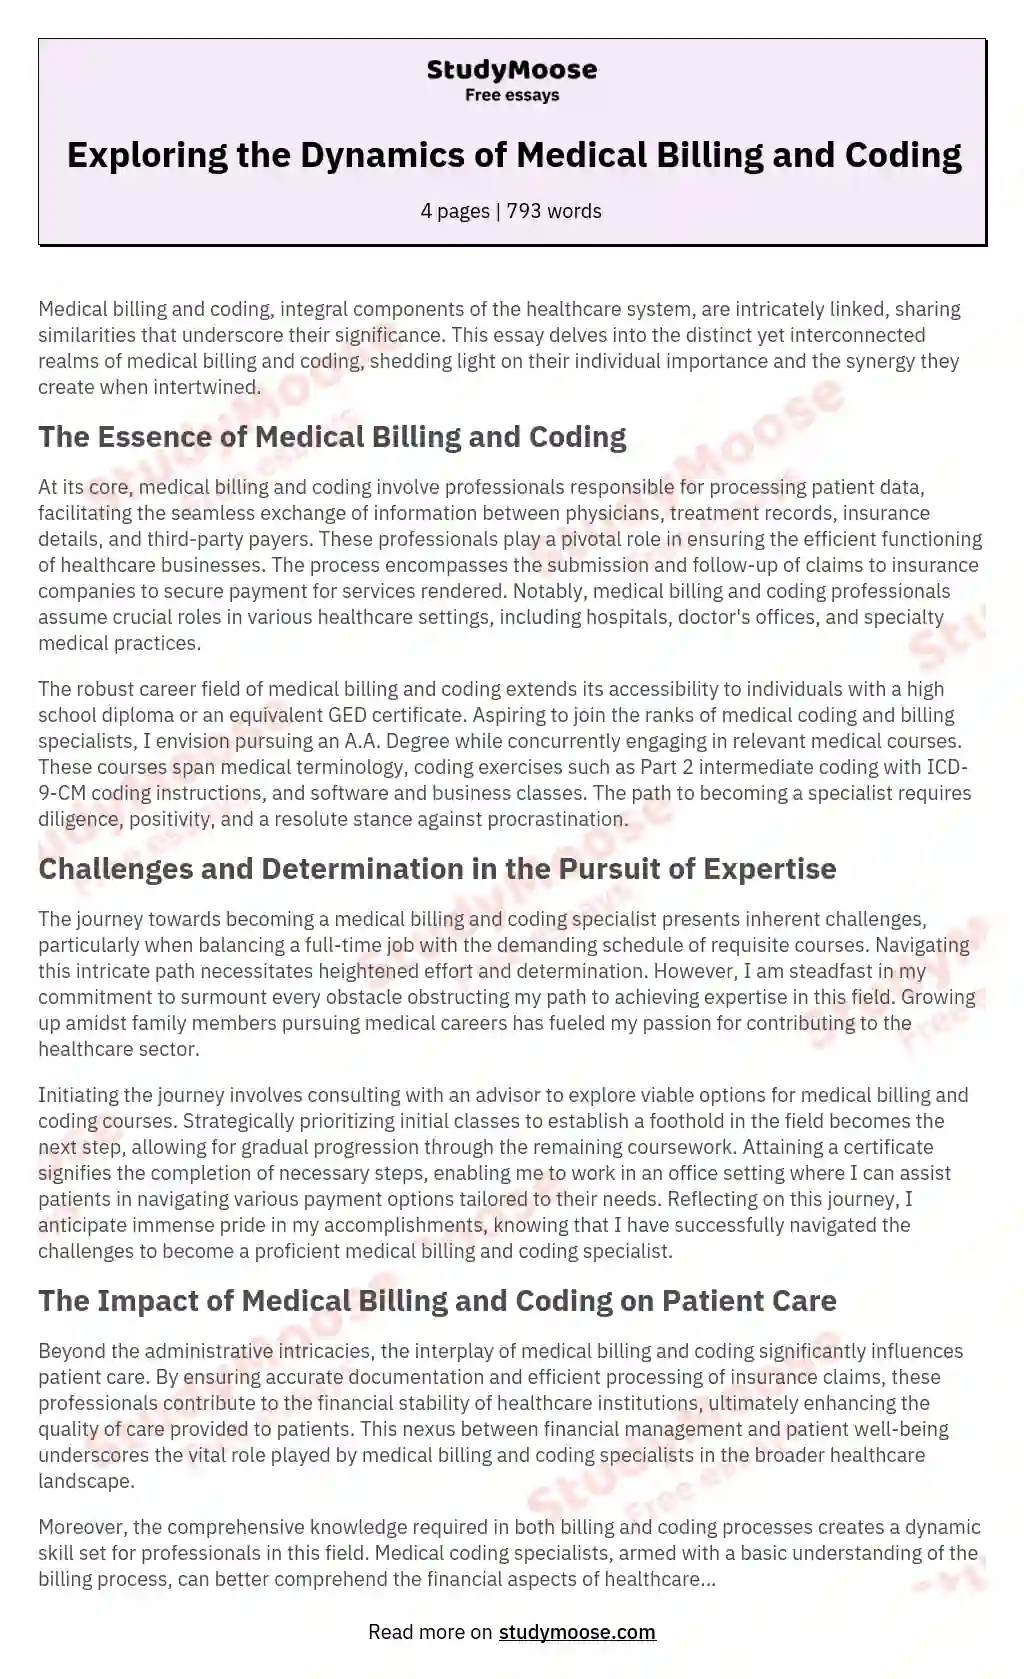 Exploring the Dynamics of Medical Billing and Coding essay